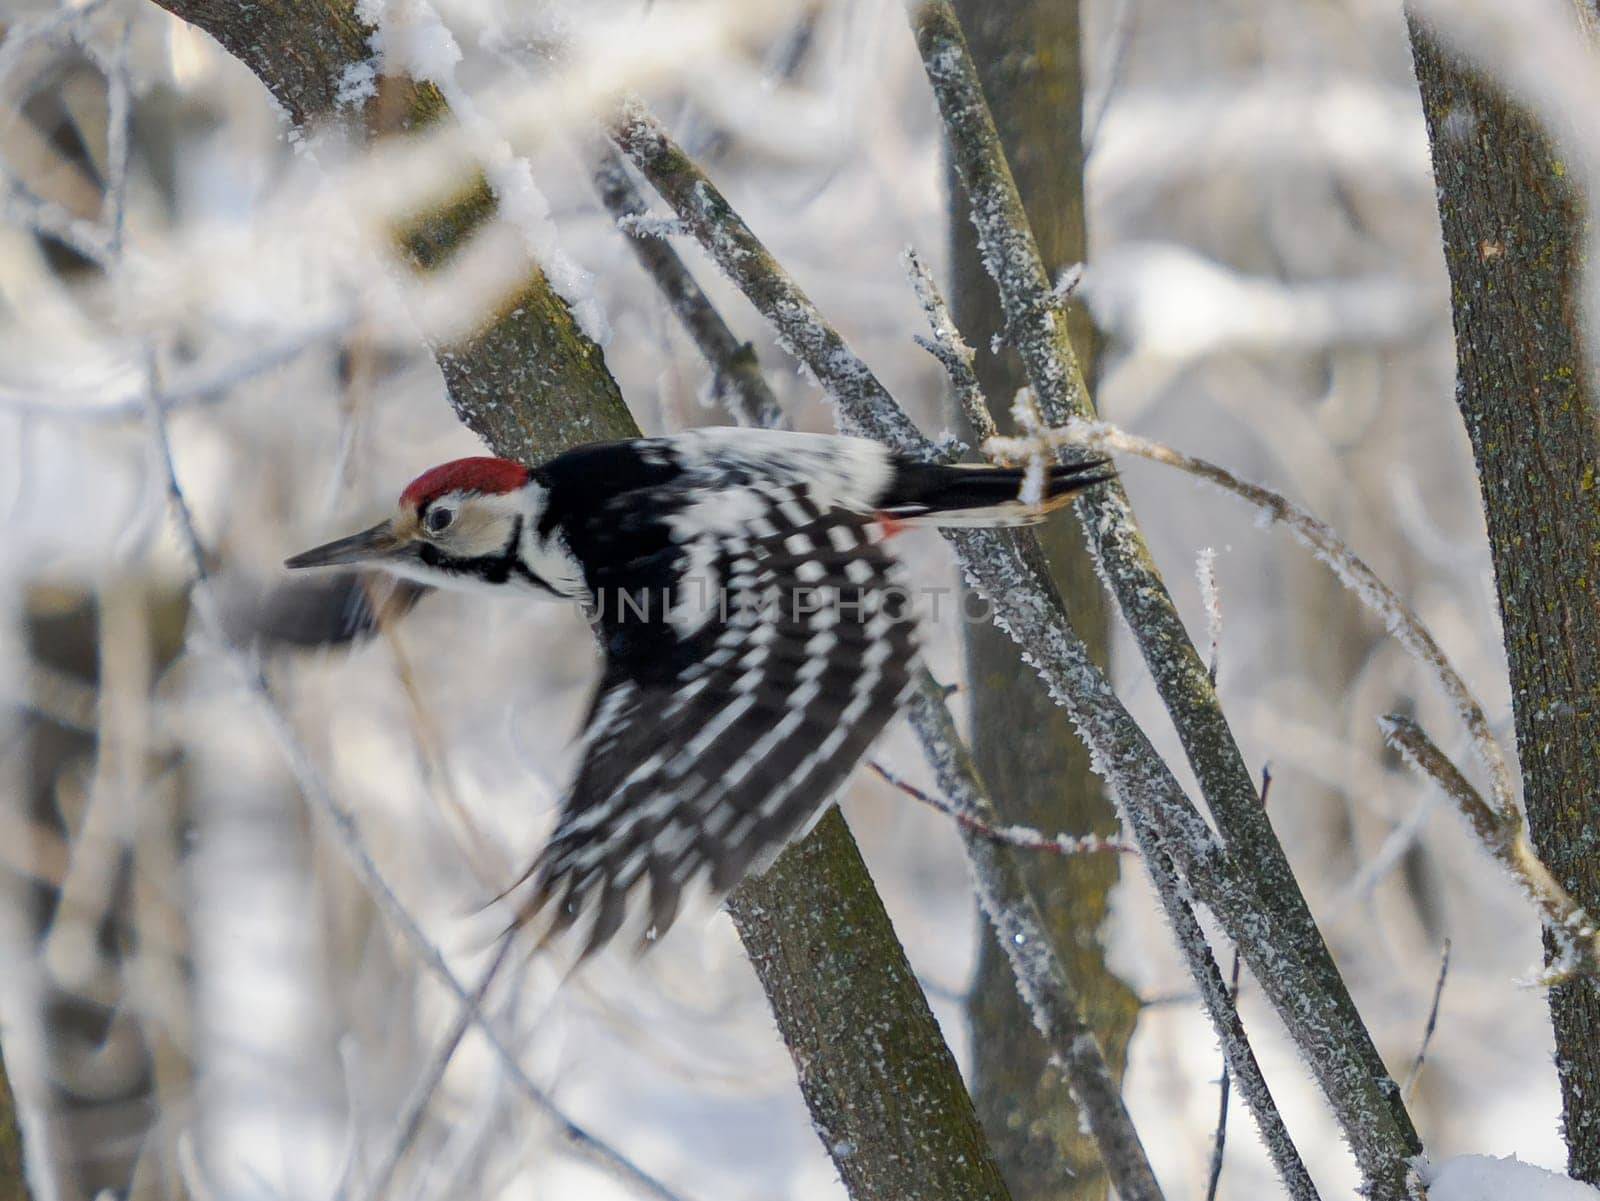 Flying Great Spotted Woodpecker in winter forest. Male Great Spotted Woodpecker in flight in wildlife nature.